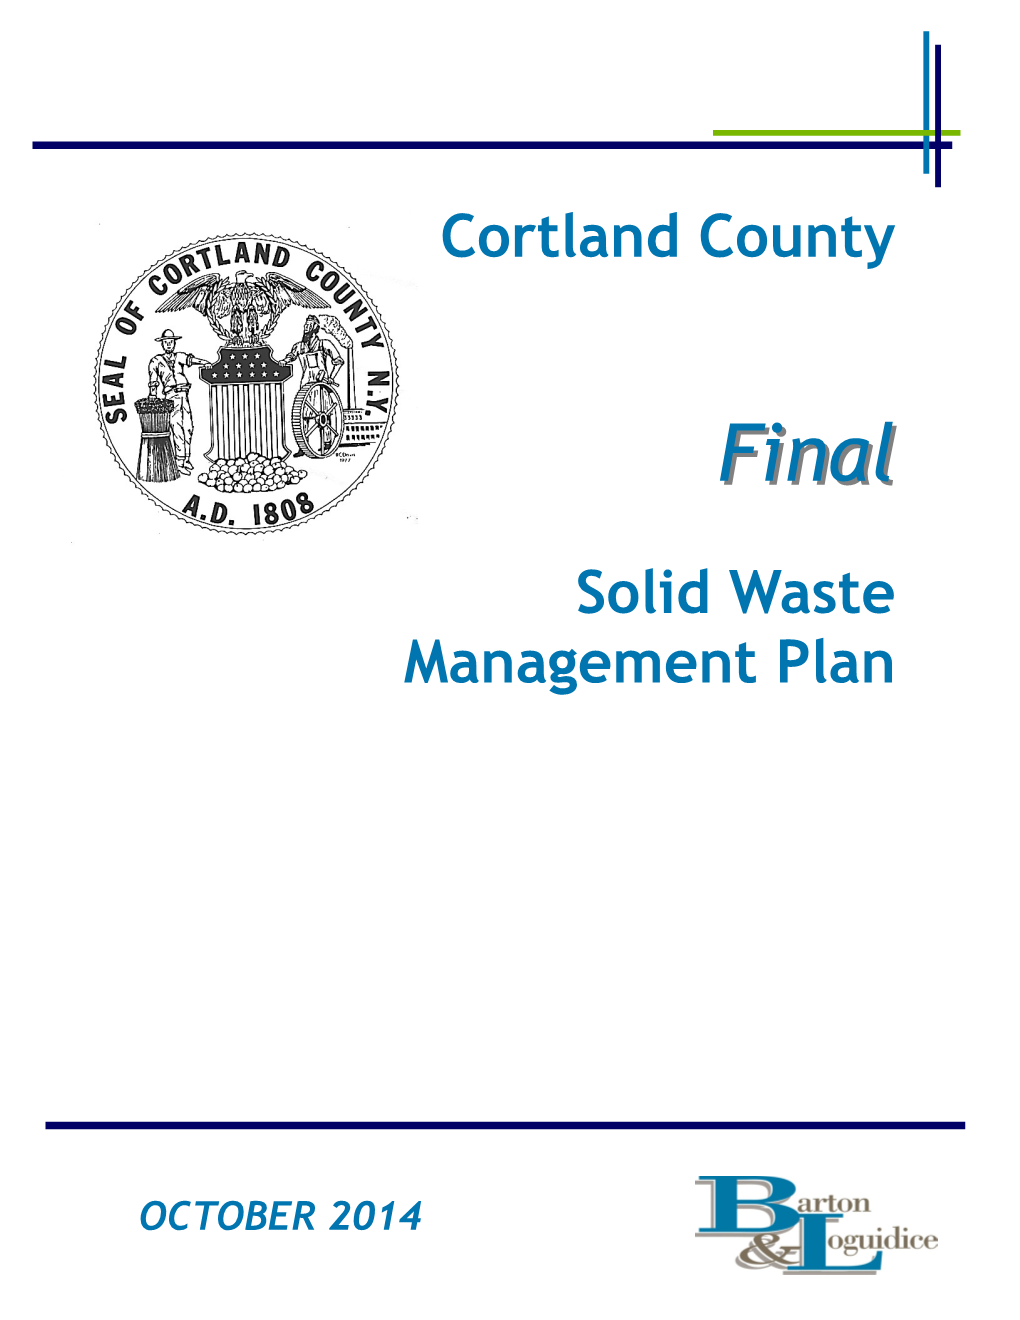 Cortland County Solid Waste Management Plan